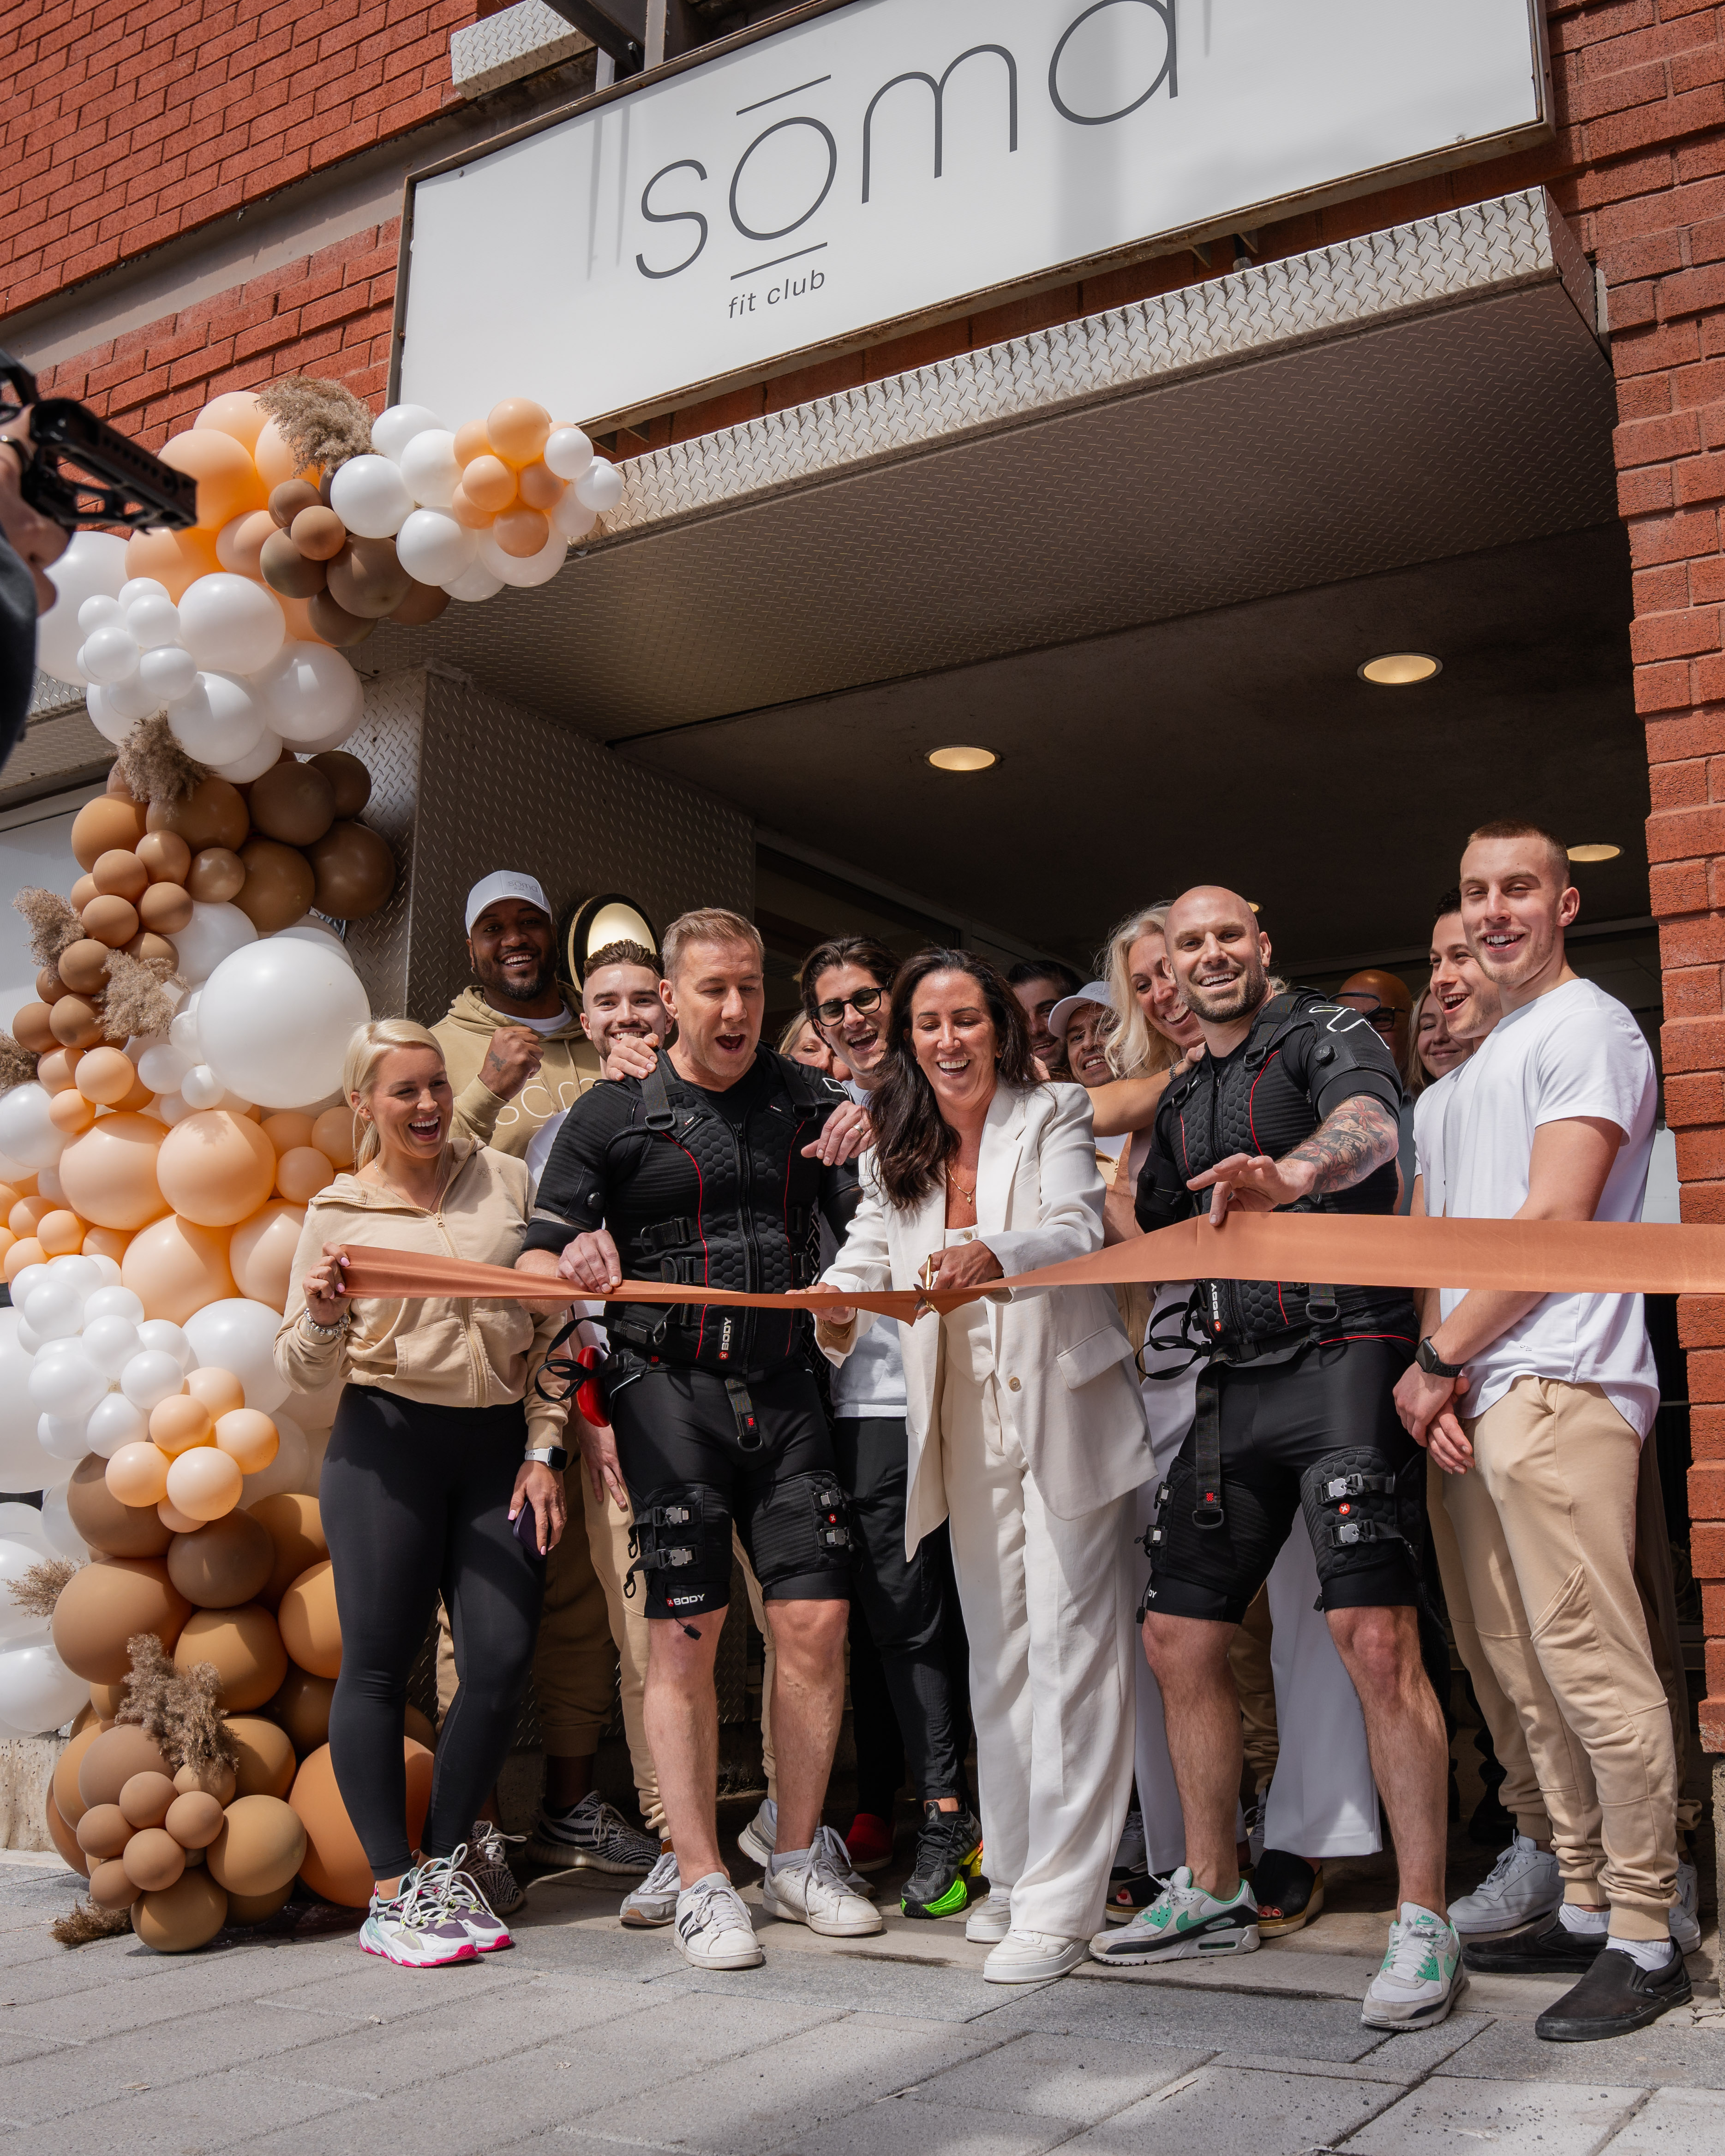 SOMA Fit Club Griffintown opening